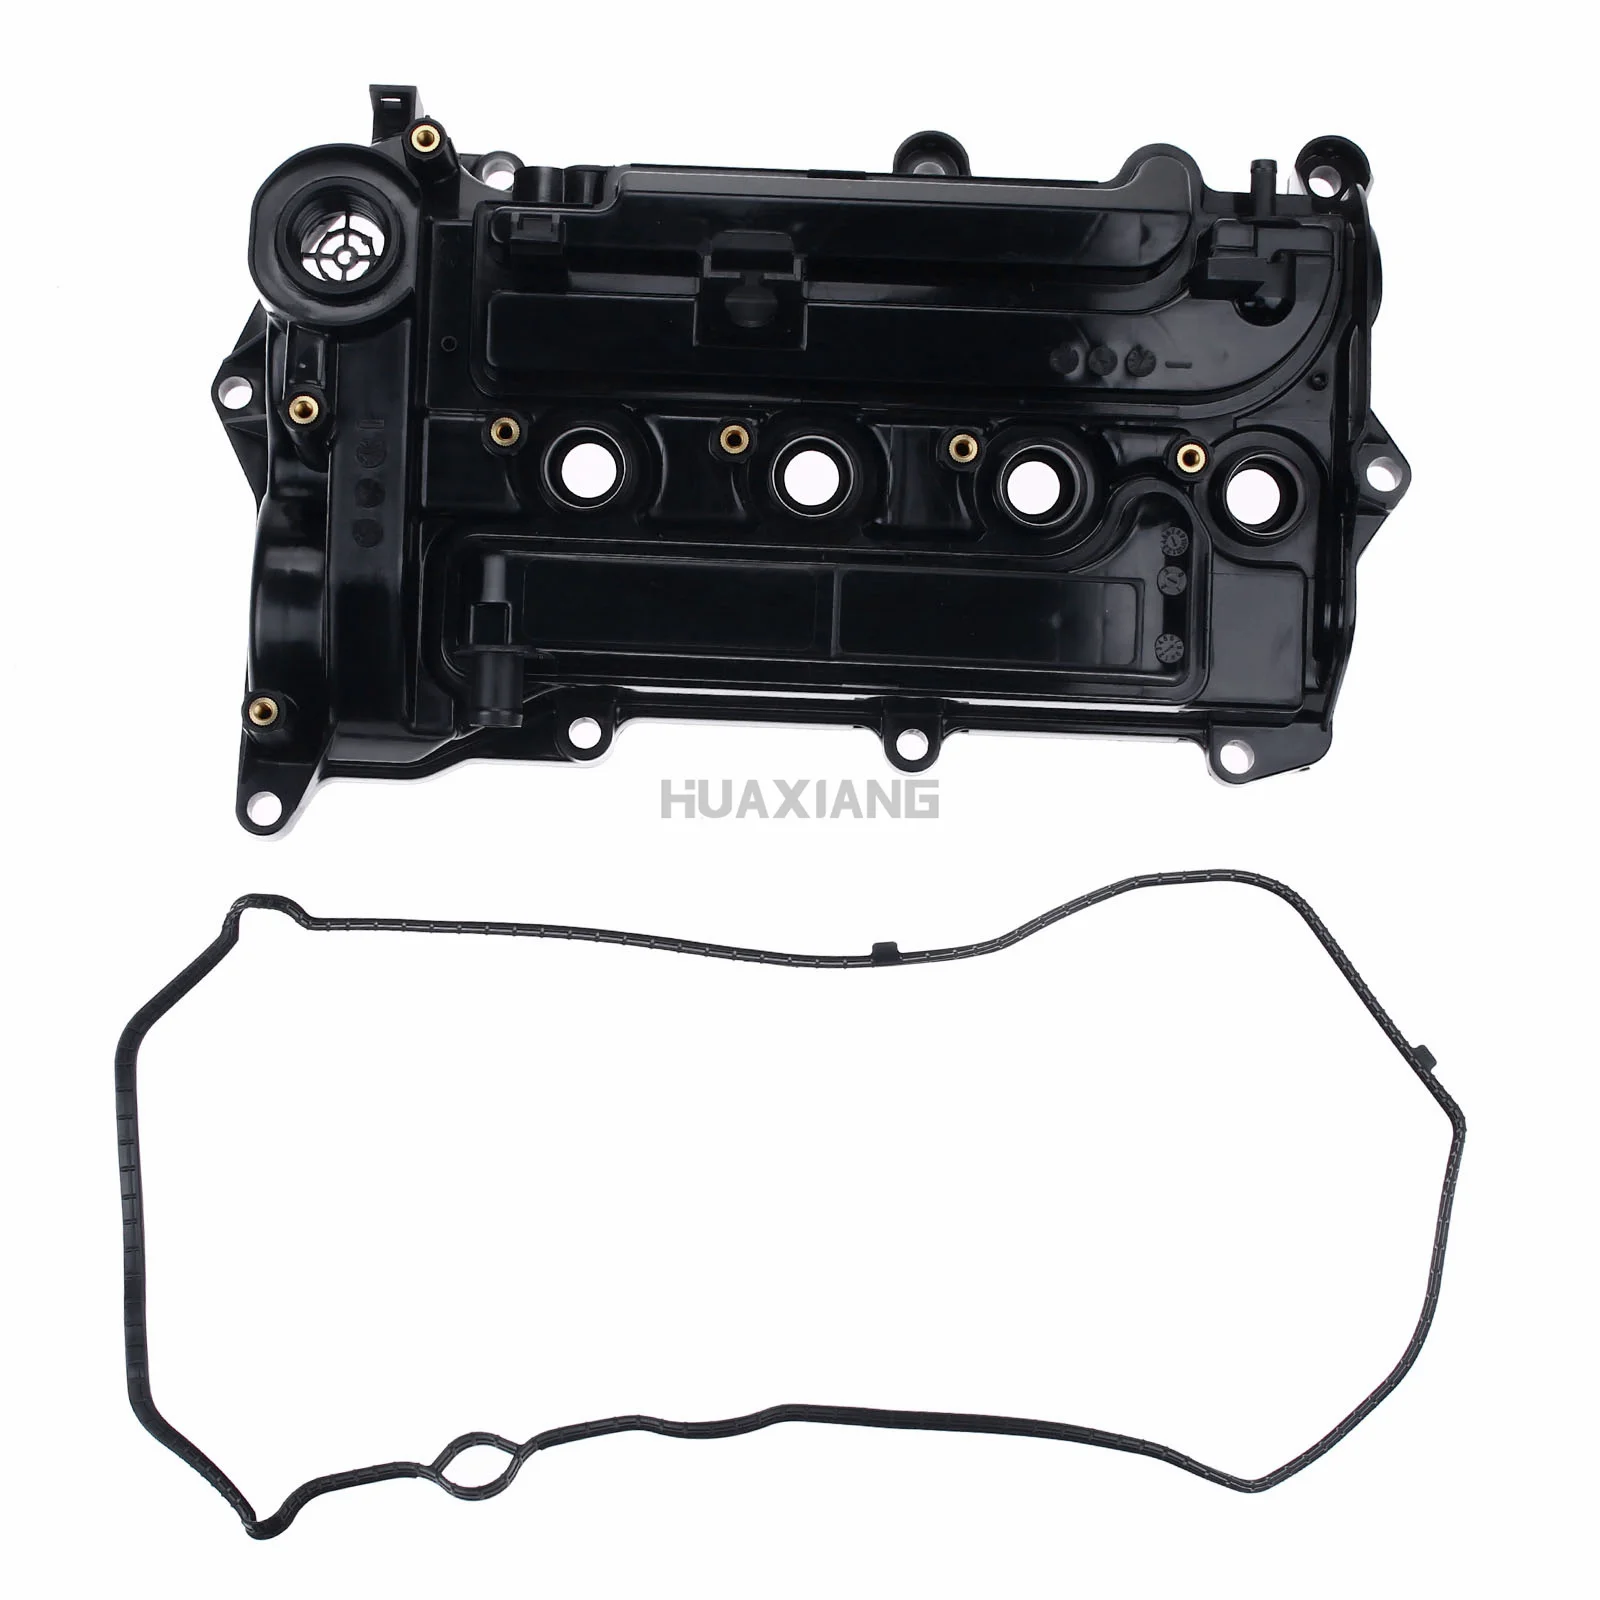 

In-stock CN US CA Engine Valve Cover with Gasket for Honda Accord Civic CR-V L4 1.5L Turbocharged 123106A0A01